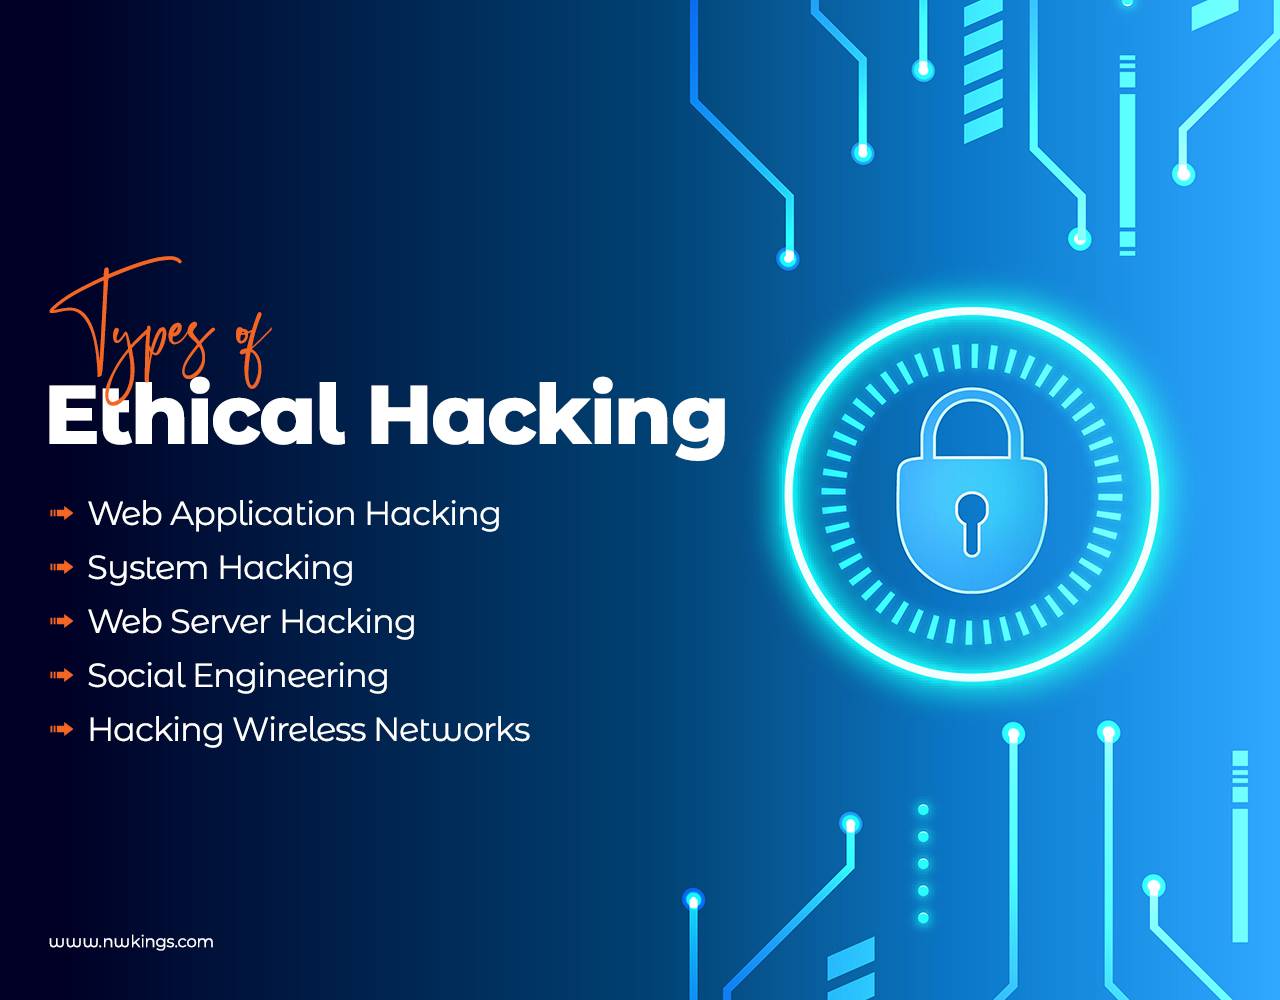 A comprehensive roadmap for ethical hacking.